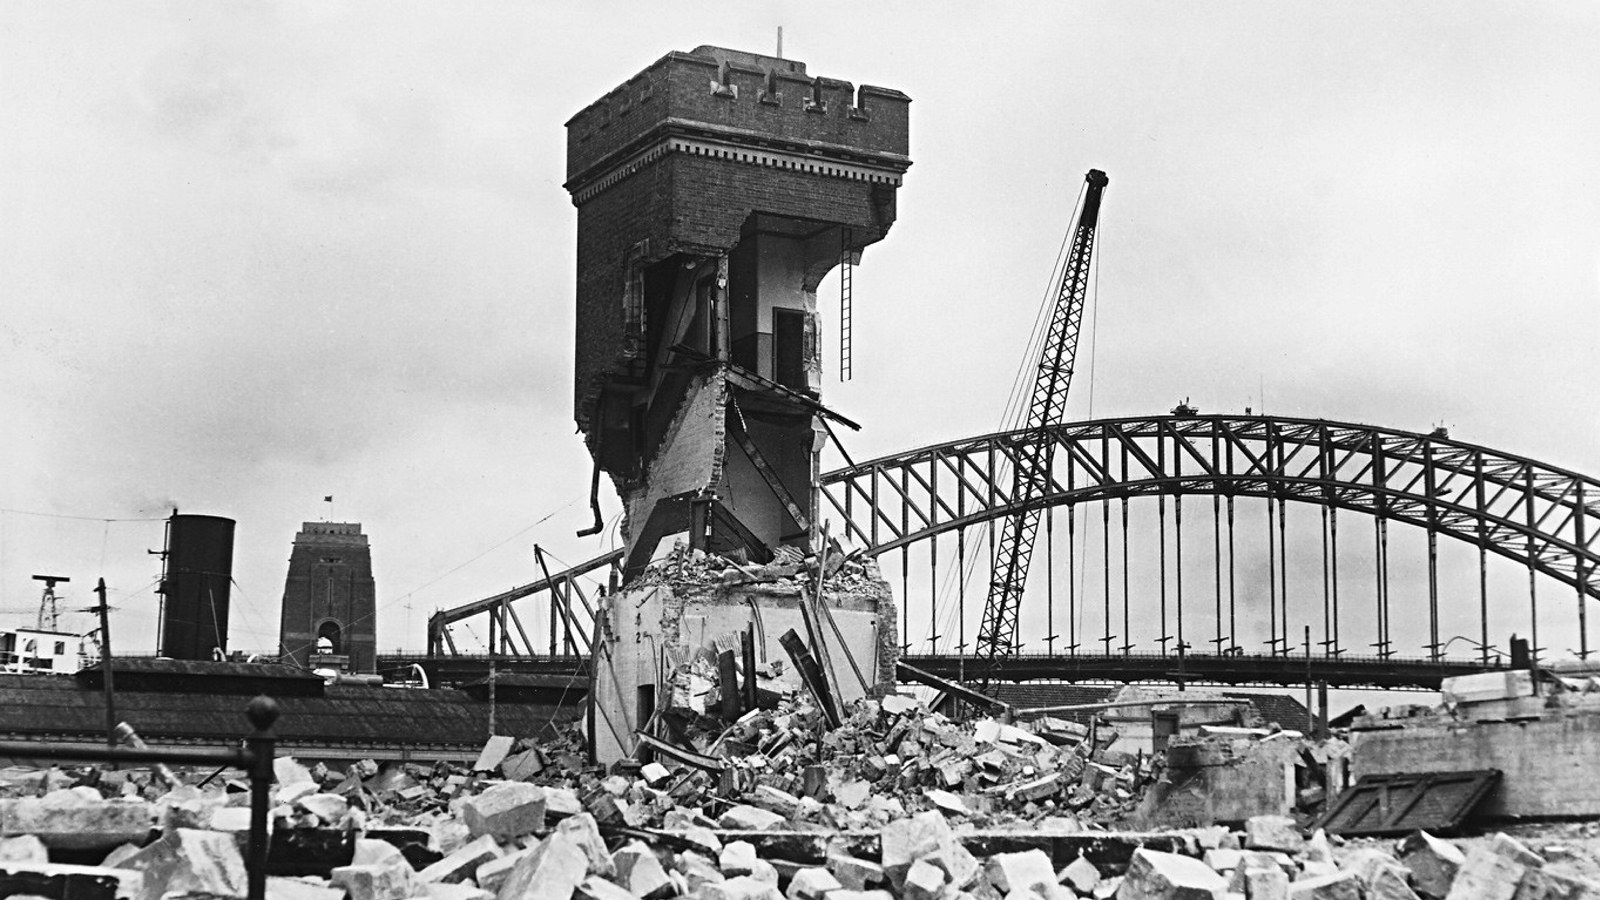 Demolished building in foreground, Harbour Bridge in background.